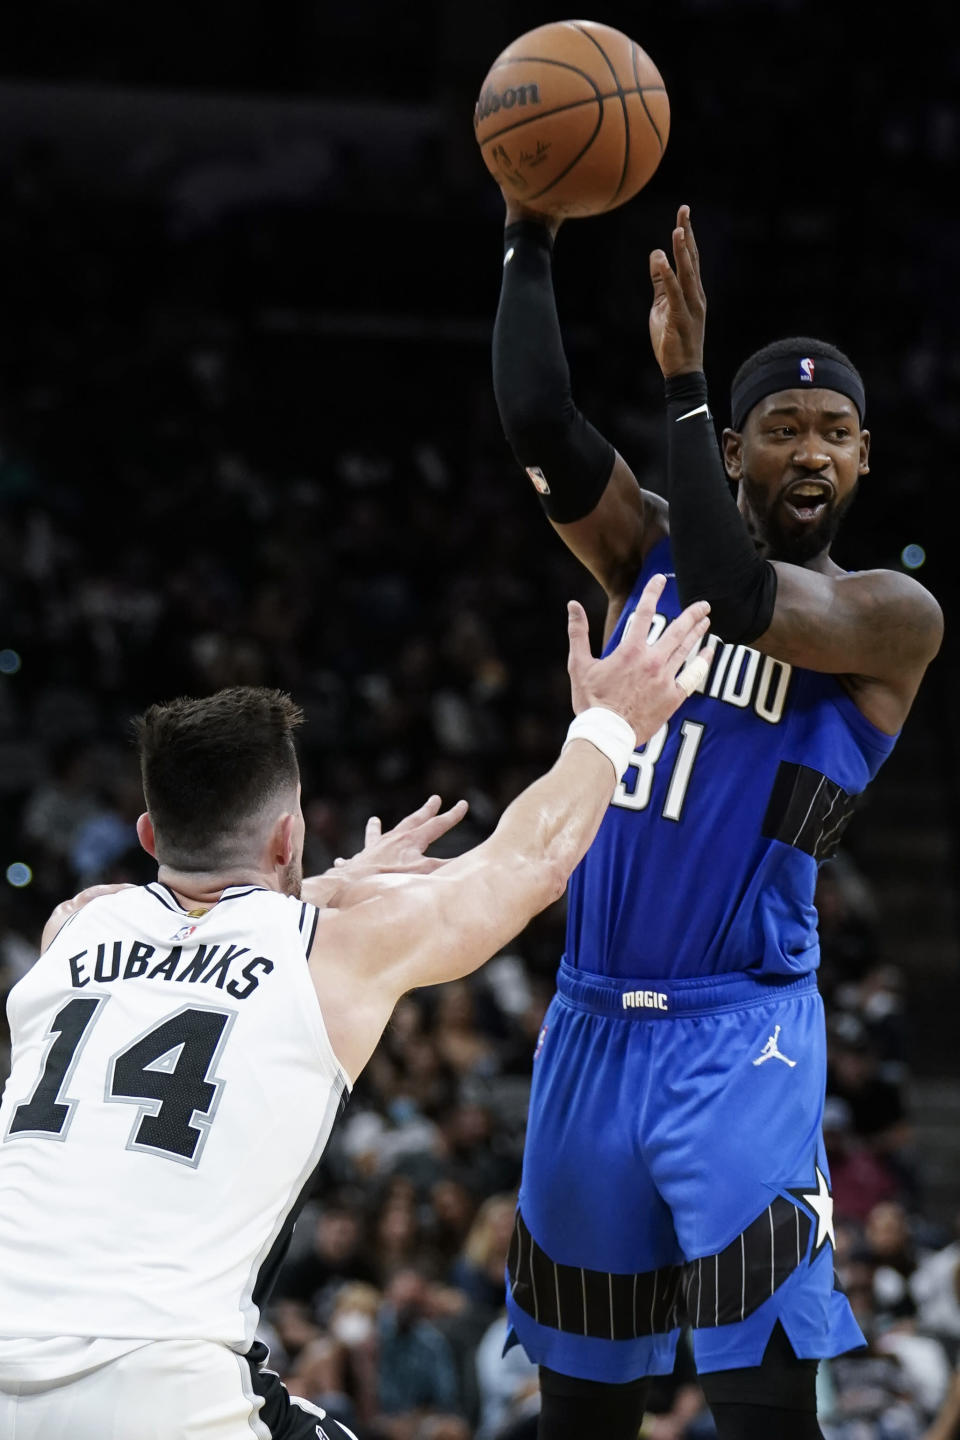 Orlando Magic's Terrance Ross looks to pass the ball as San Antonio Spurs' Drew Eubanks defends during the first half of an NBA basketball game Wednesday, Oct. 20, 2021, in San Antonio. (AP Photo/Darren Abate)